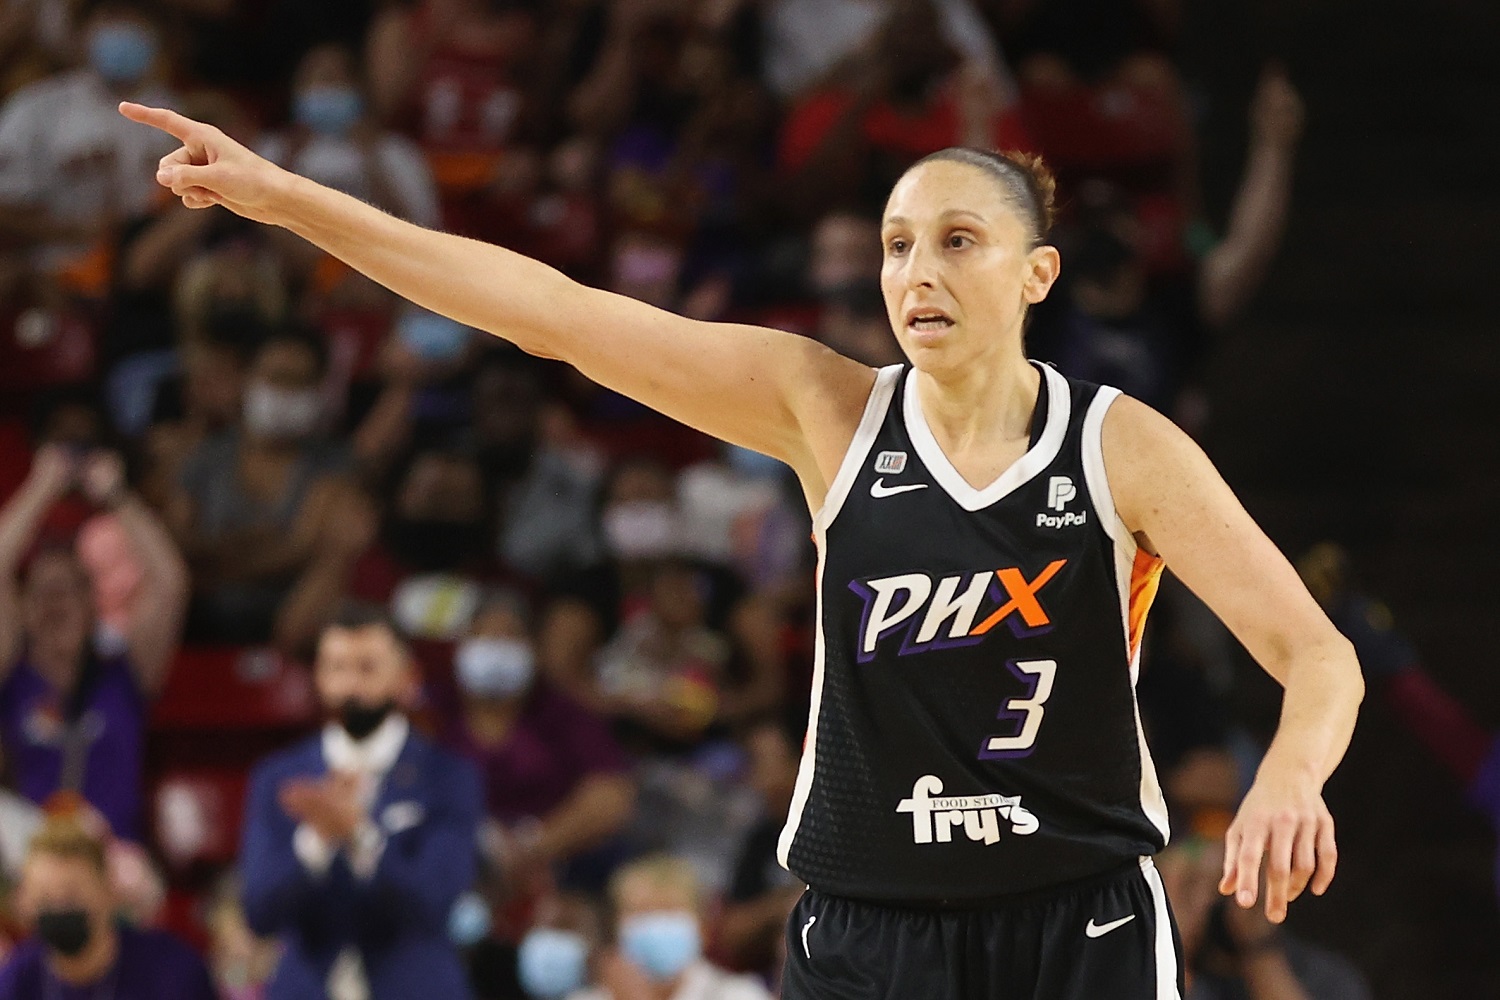 Diana Taurasi of the Phoenix Mercury during Game 3 of the 2021 WNBA semifinals at Desert Financial Arena on Oct. 3, 2021 in Tempe, Arizona. The Mercury defeated the Las Vegas Aces, 87-60.